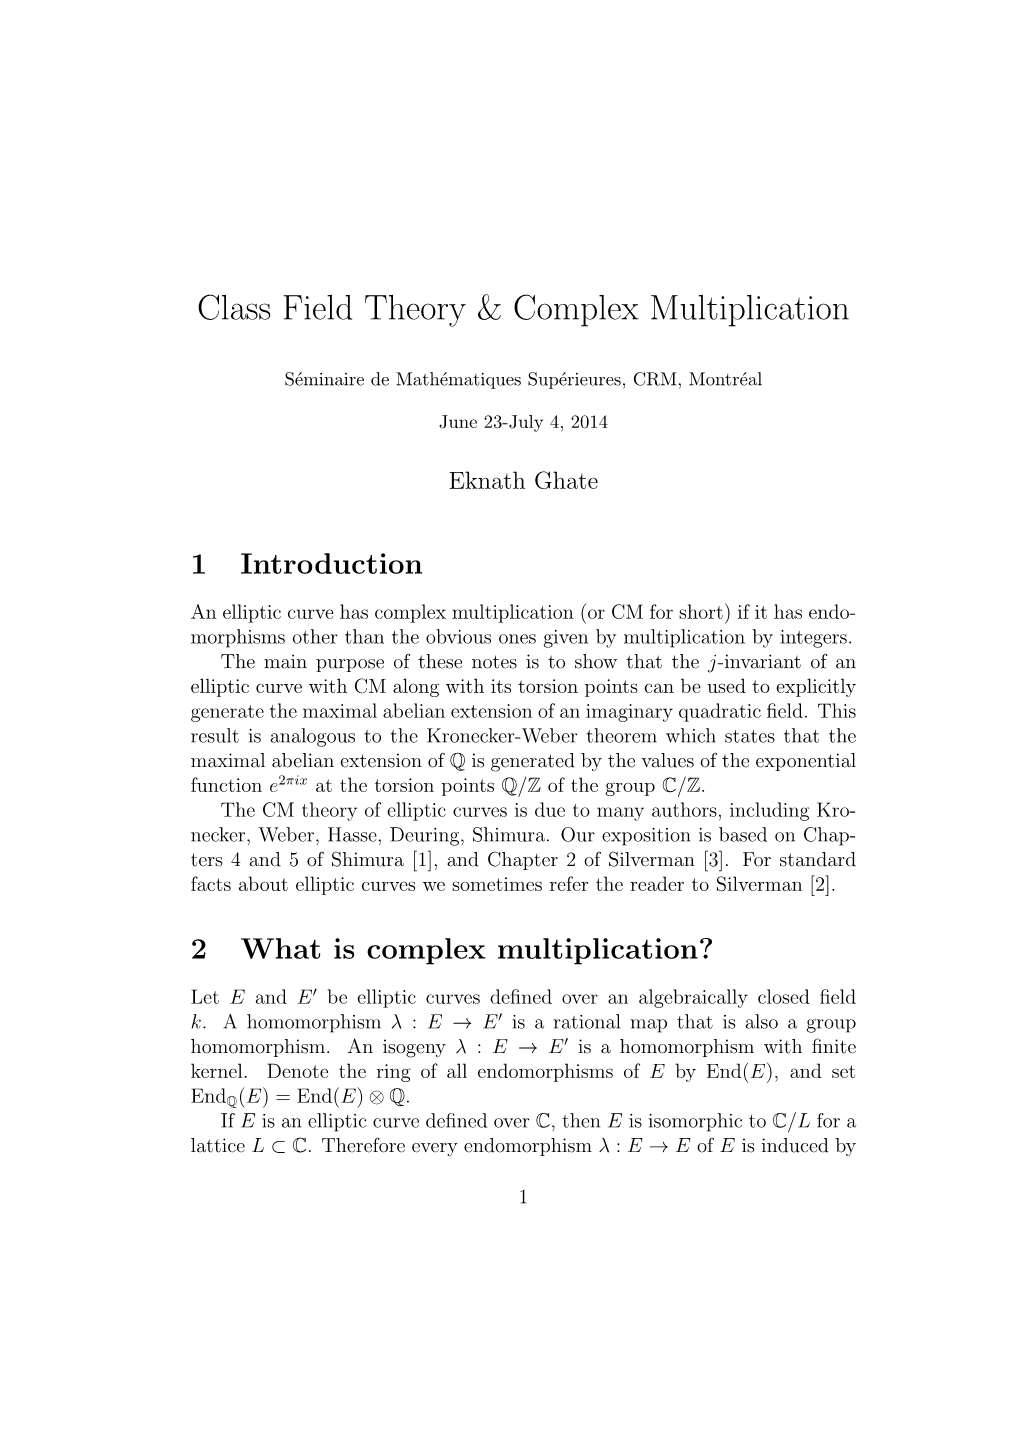 Class Field Theory & Complex Multiplication